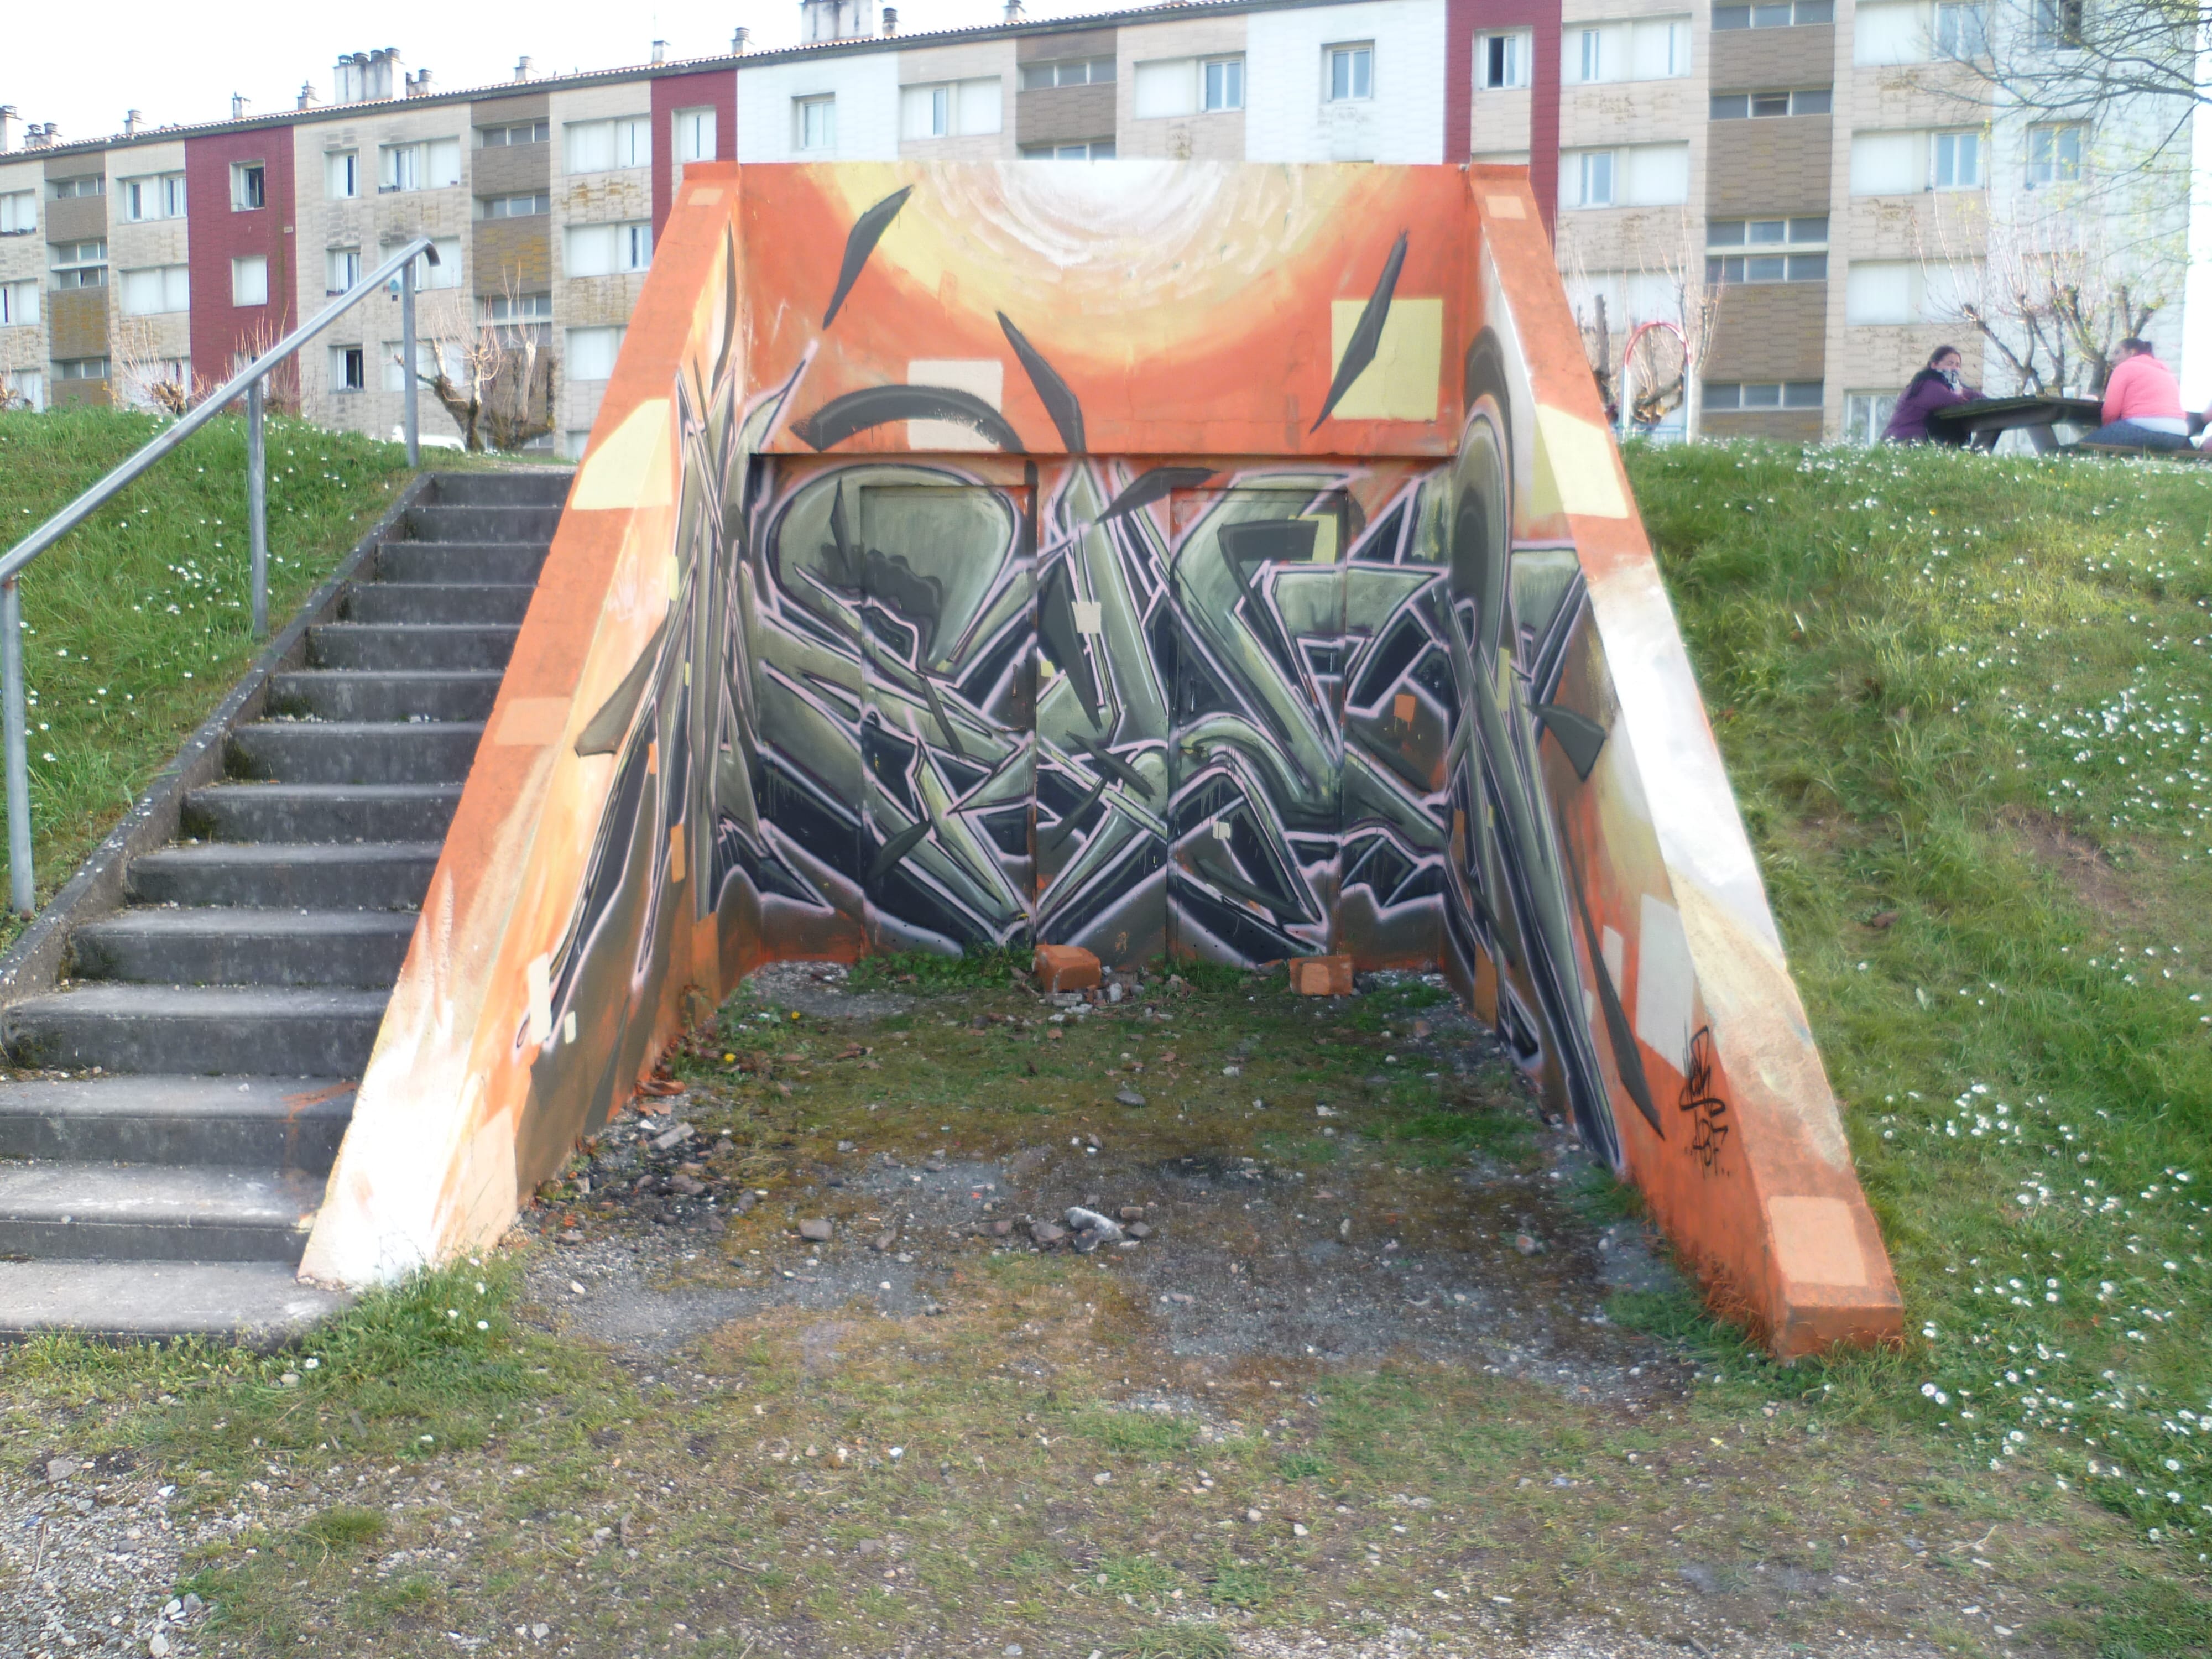 Graffiti 5650 #neurabf captured by Neur Abf in Coulounieix-Chamiers France